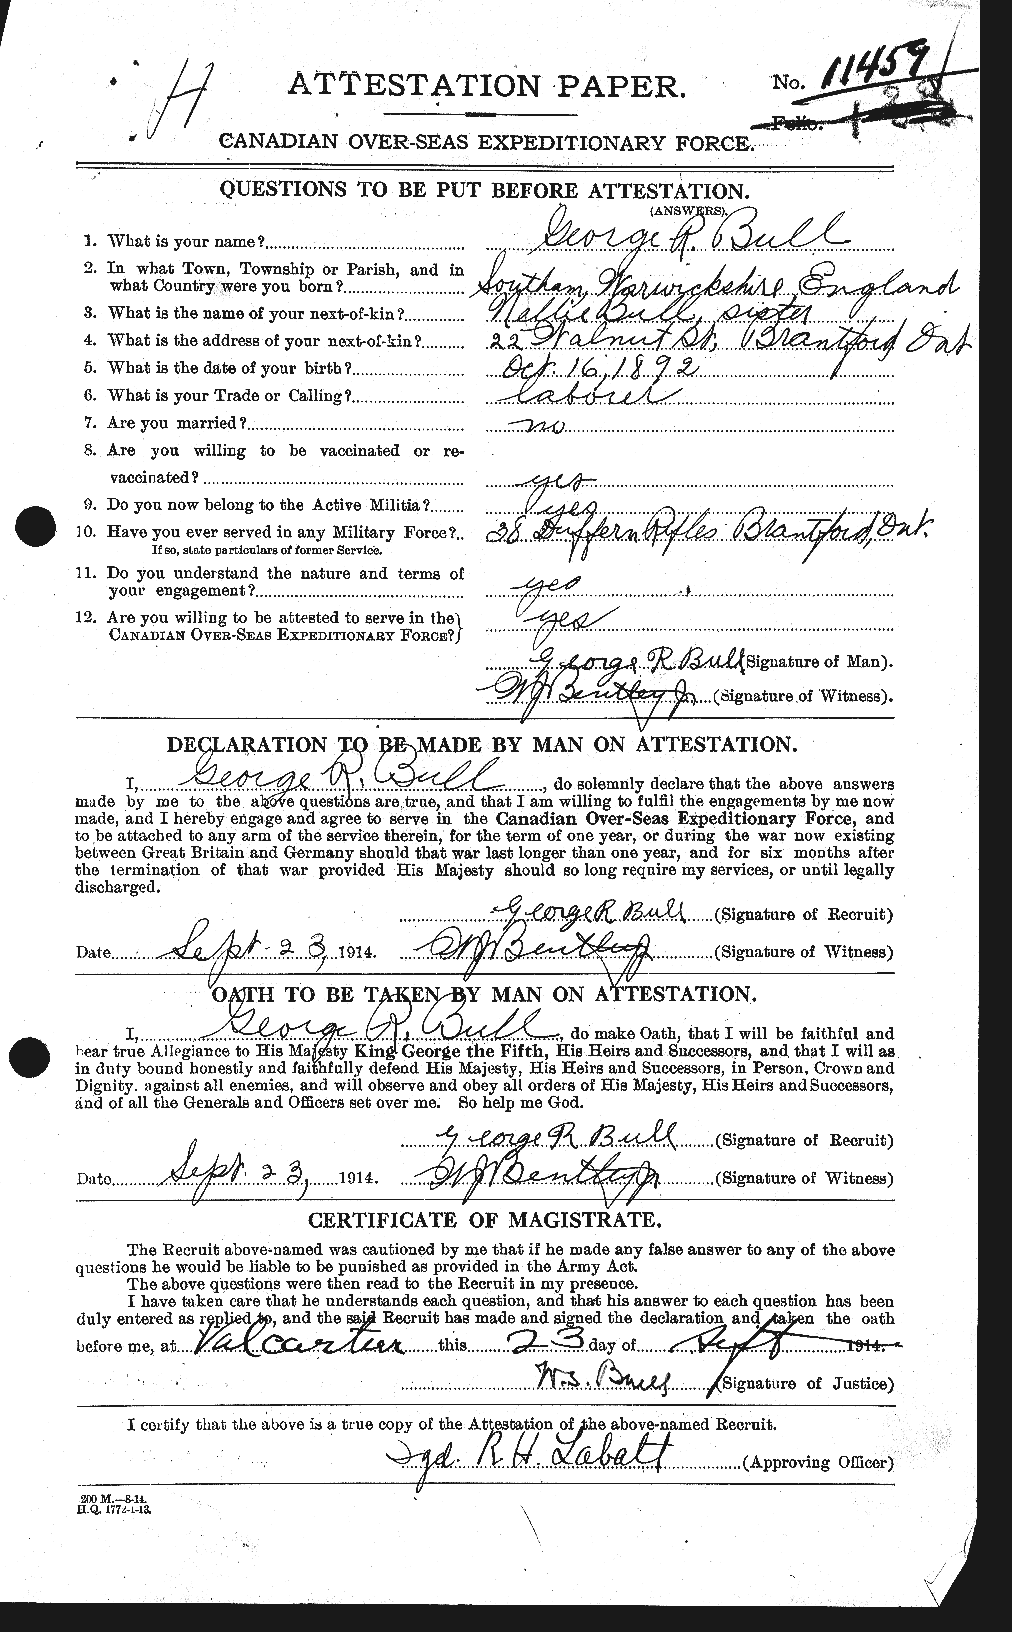 Personnel Records of the First World War - CEF 273400a